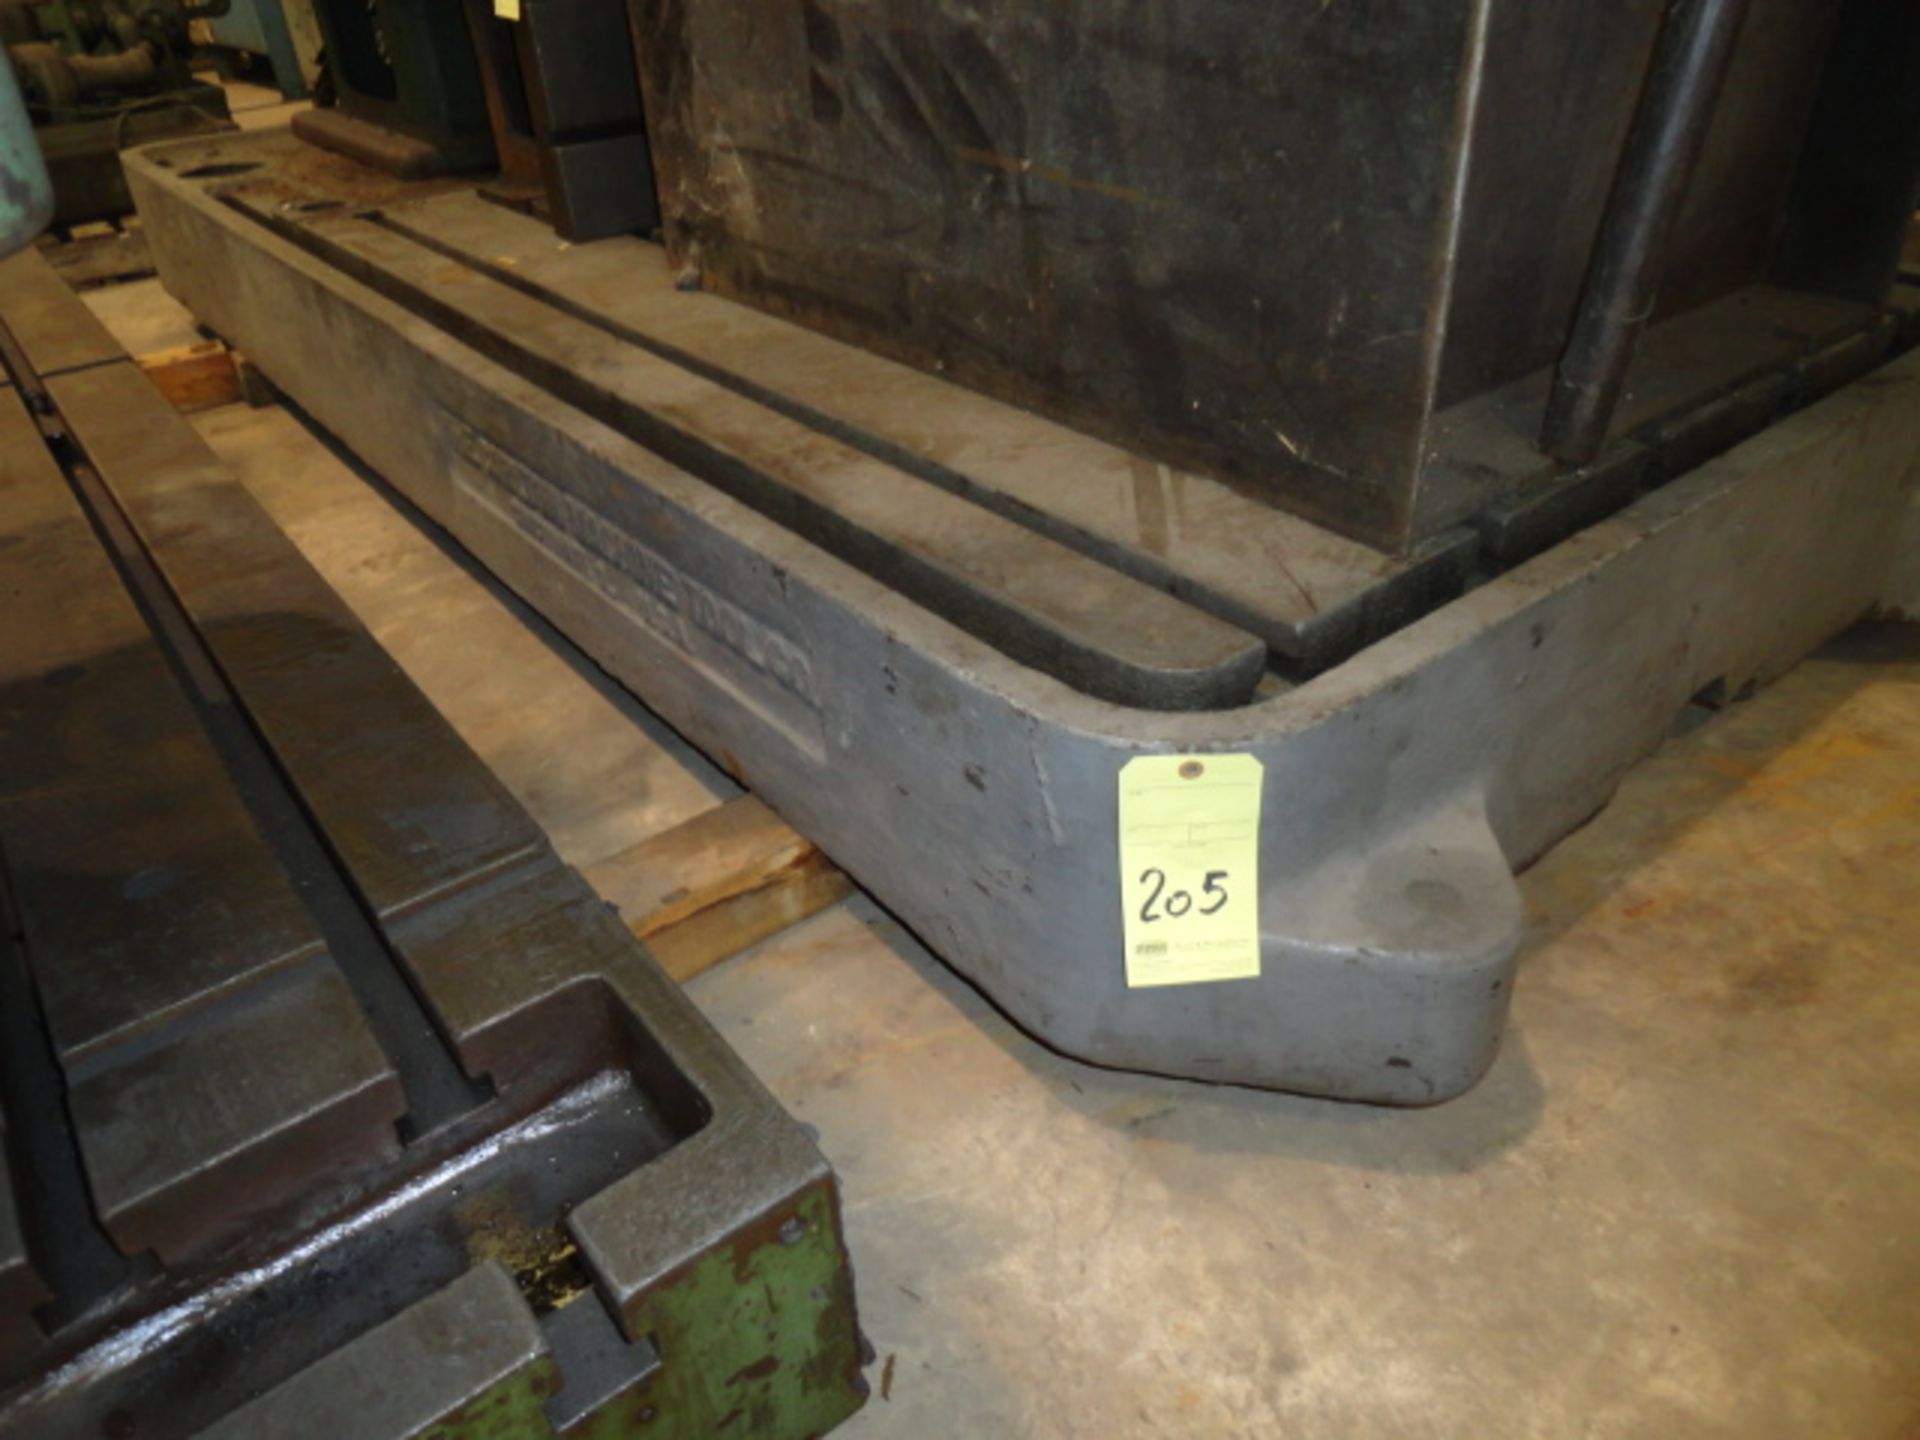 RADIAL DRILL BASE, CARLTON, 120" x 50" x 10" thk., T-slotted (base only)